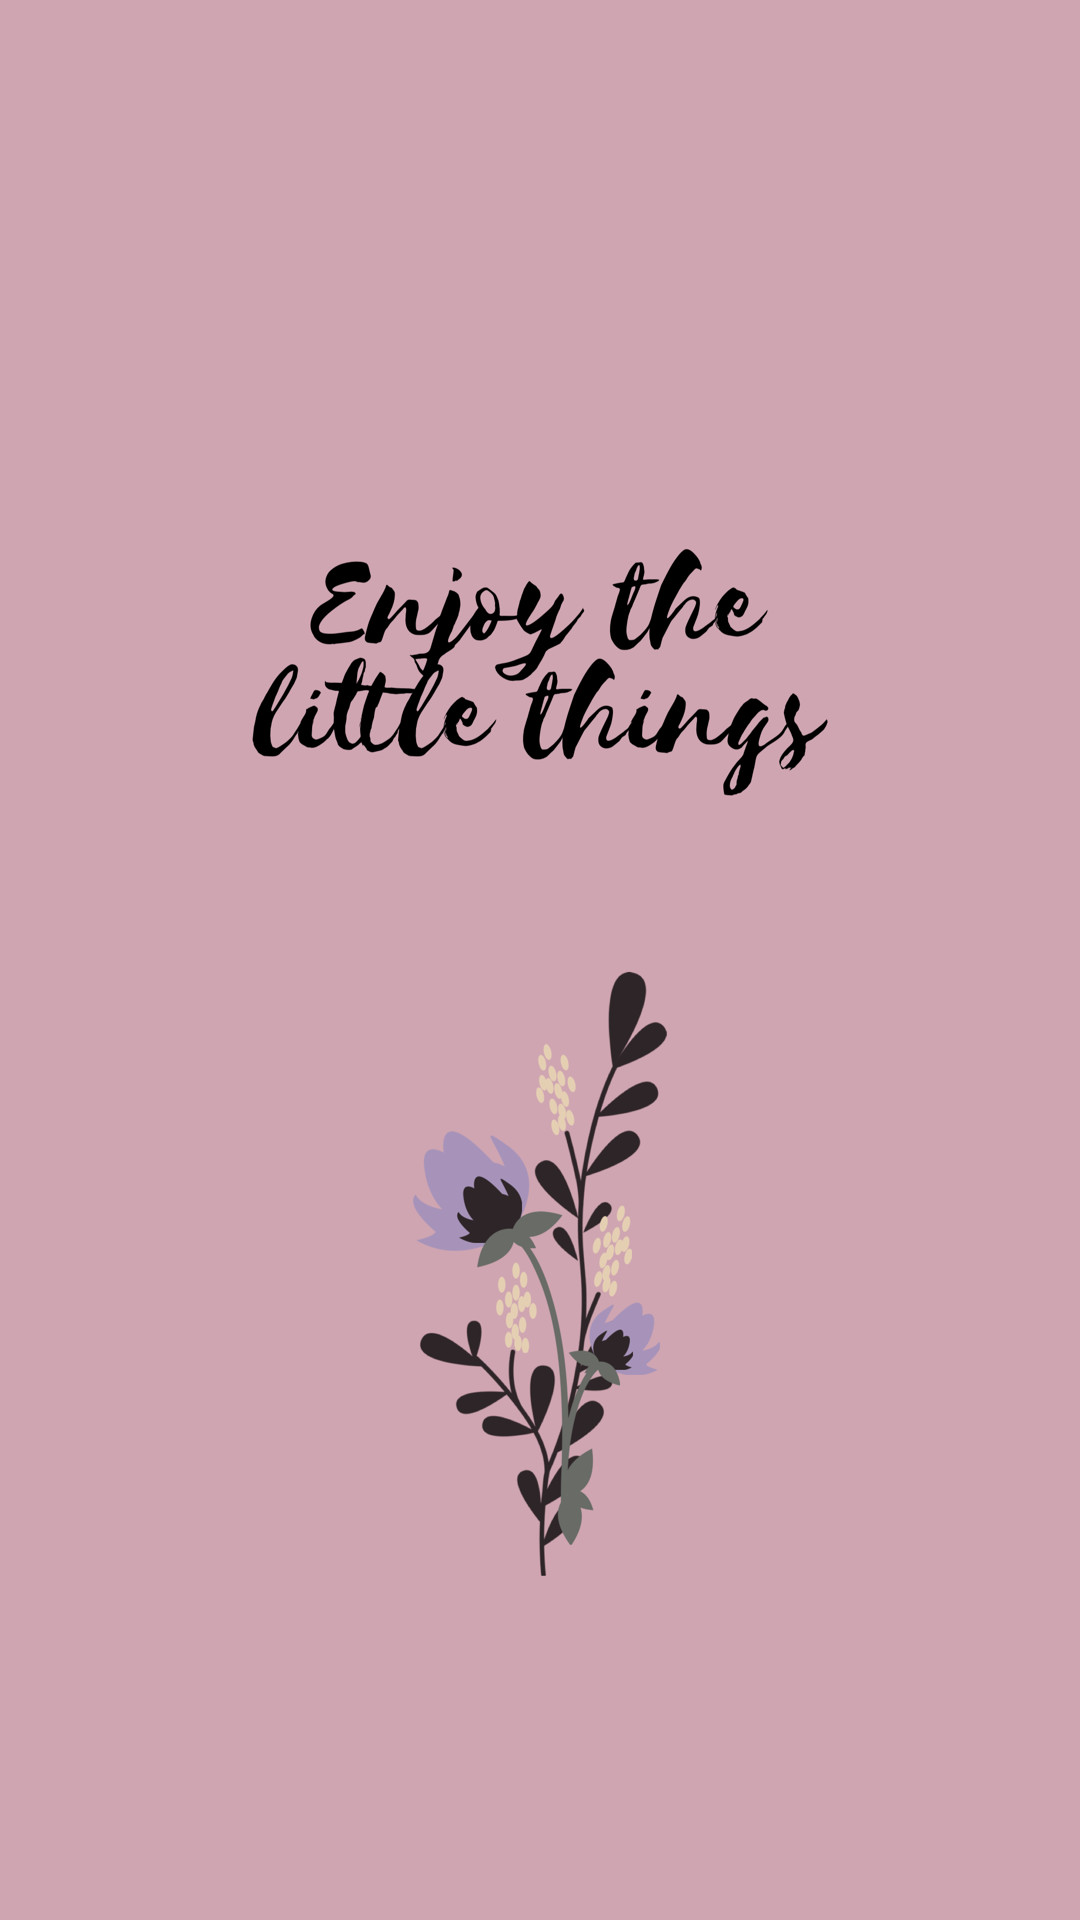 1080x1920 Quote iPhone wallpaper Quote phone wallpapers